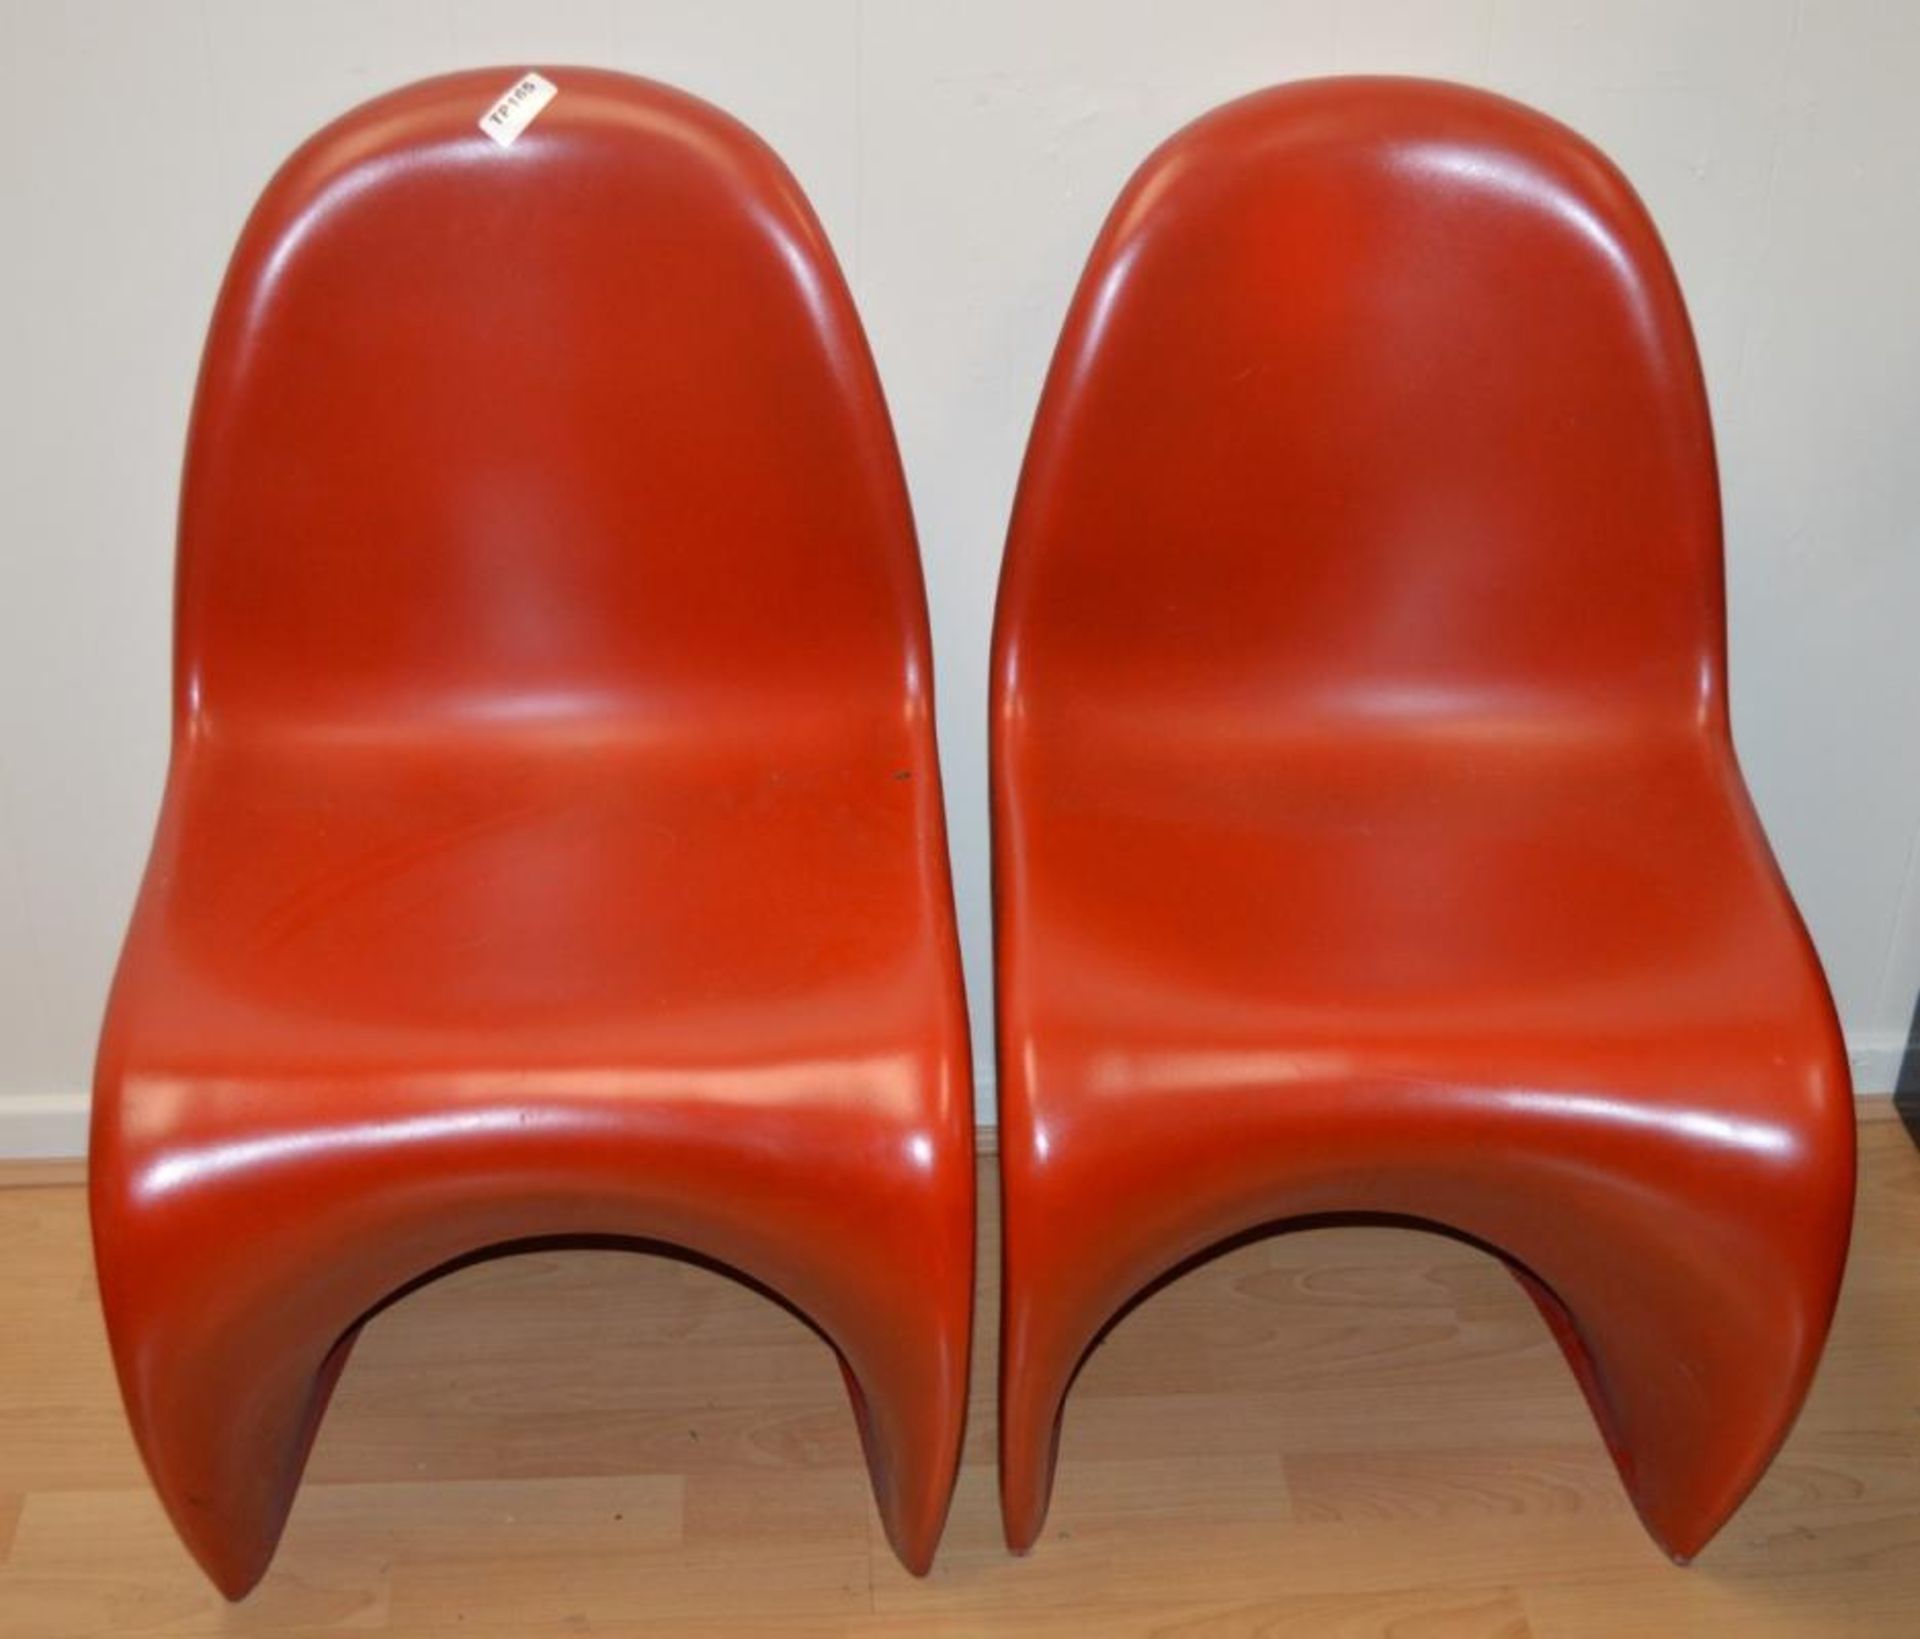 2 x Reproduction Panton S Chairs in Red - Ref TP165 - CL011 - Location: Altrincham WA14 - Image 2 of 2